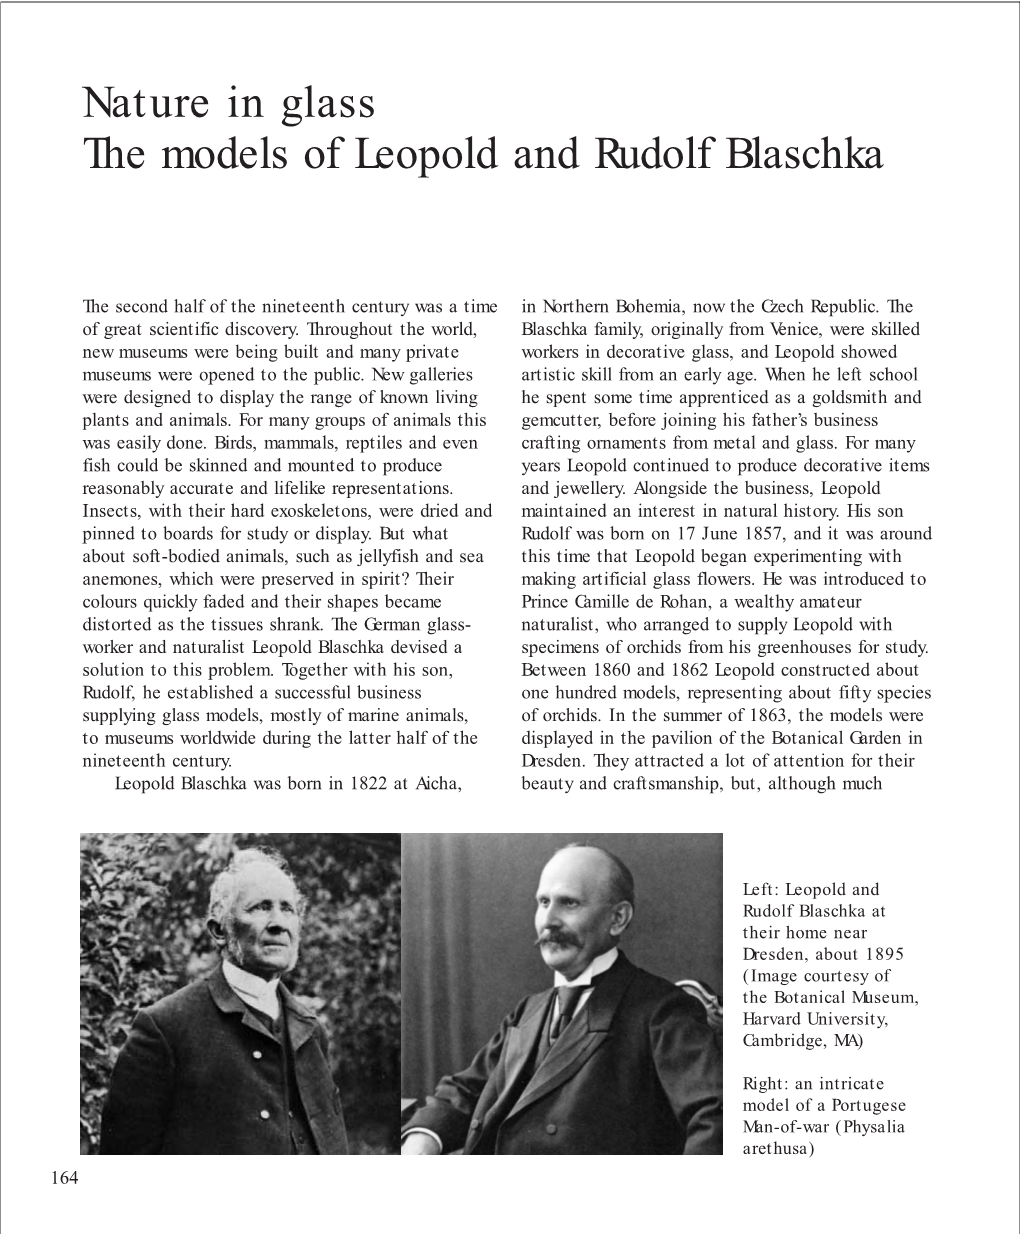 Nature in Glass the Models of Leopold and Rudolf Blaschka